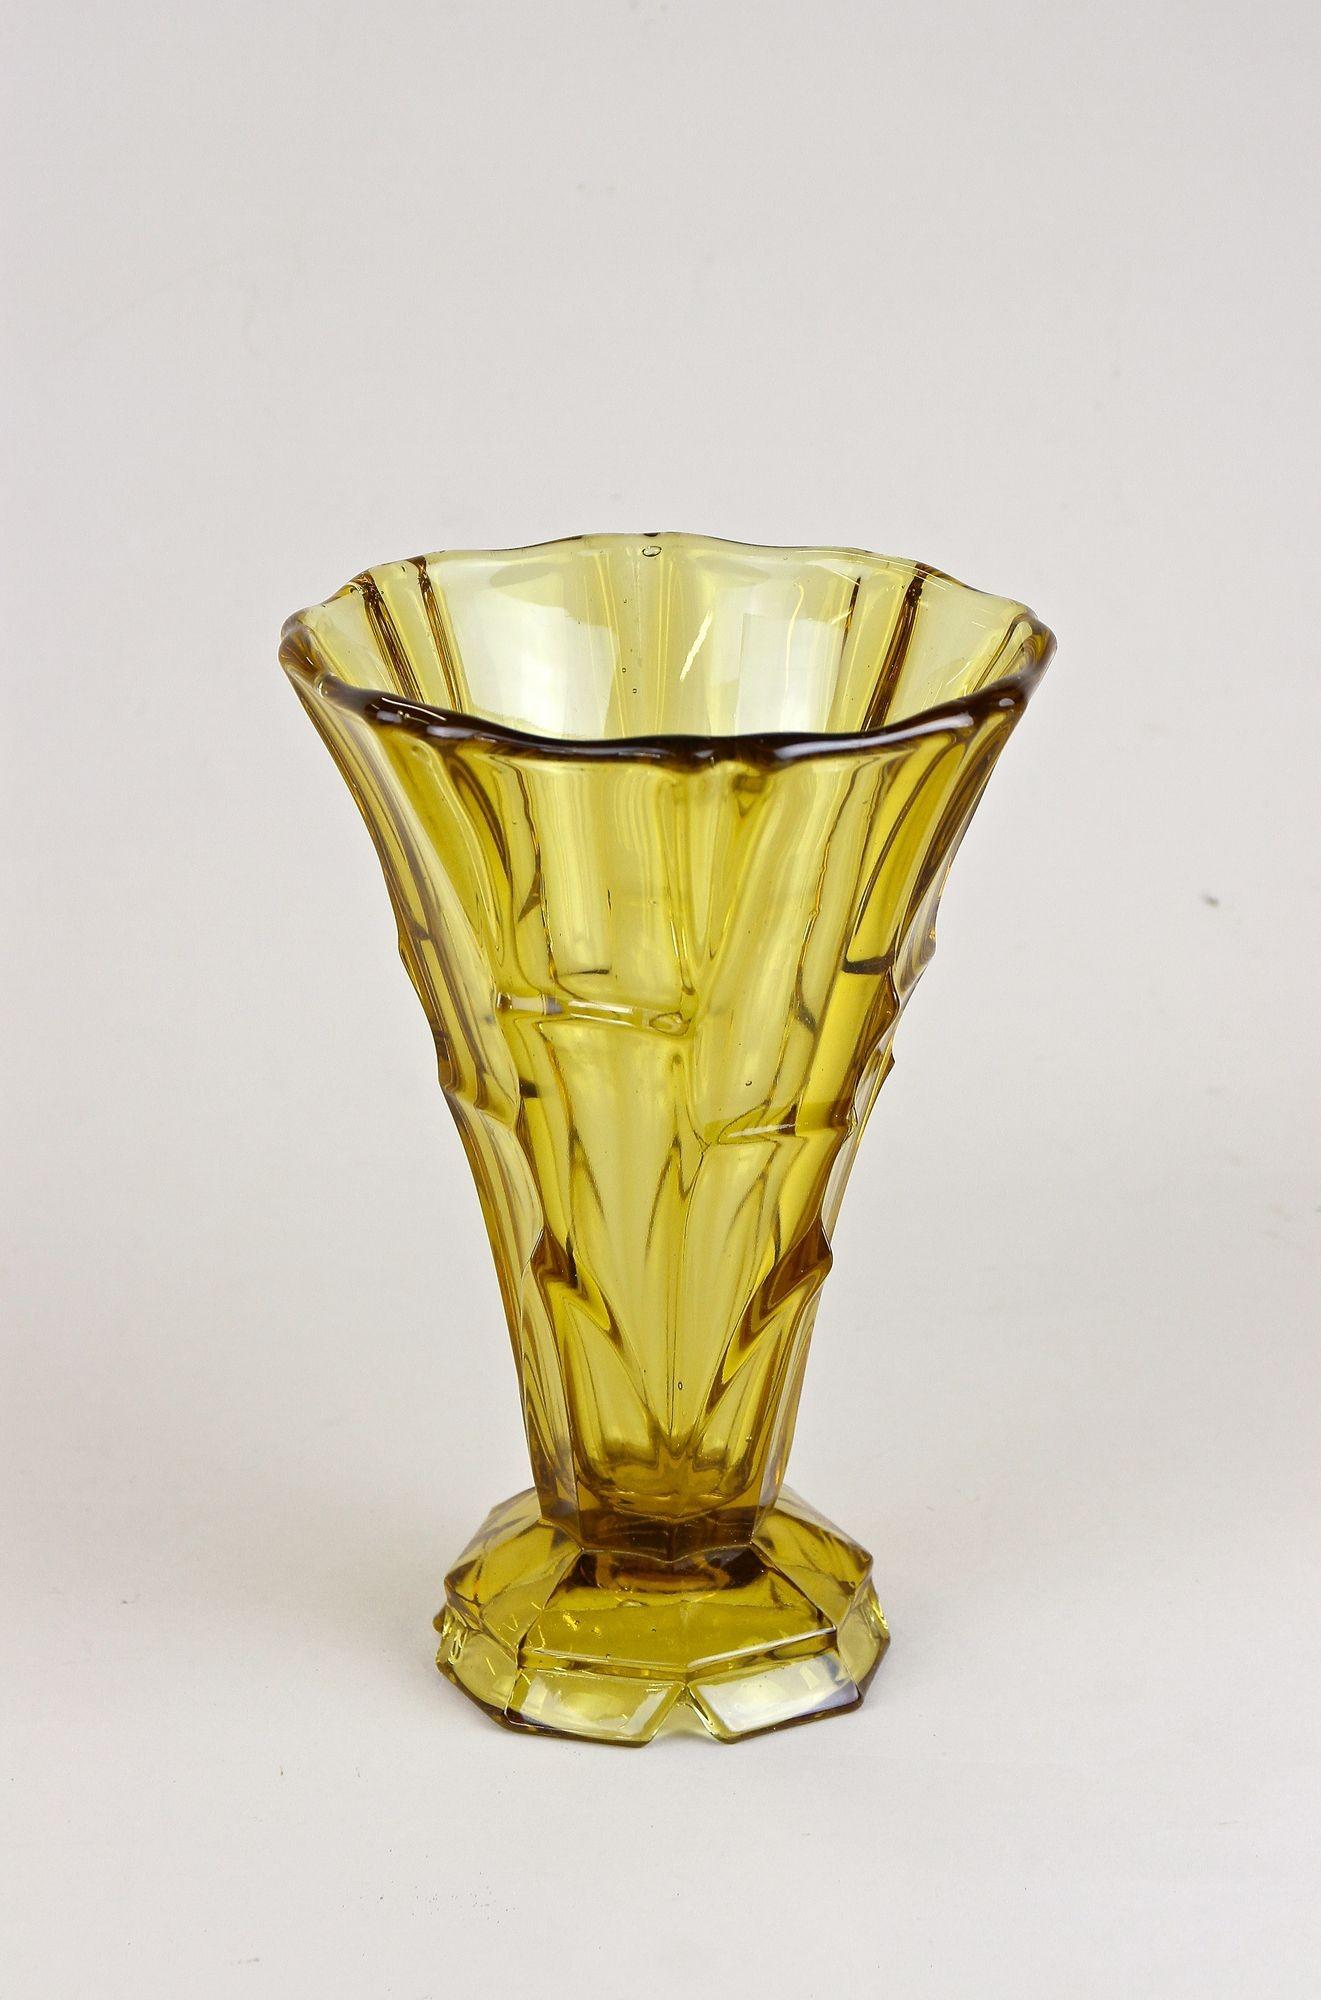 Lovely 20th century amber colored glass vase from the early Art Deco period in Austria around 1920. A fantastic shaped glass vase adorned by a special design building beautiful pattern depending on the incidence of light. This beautifully looking